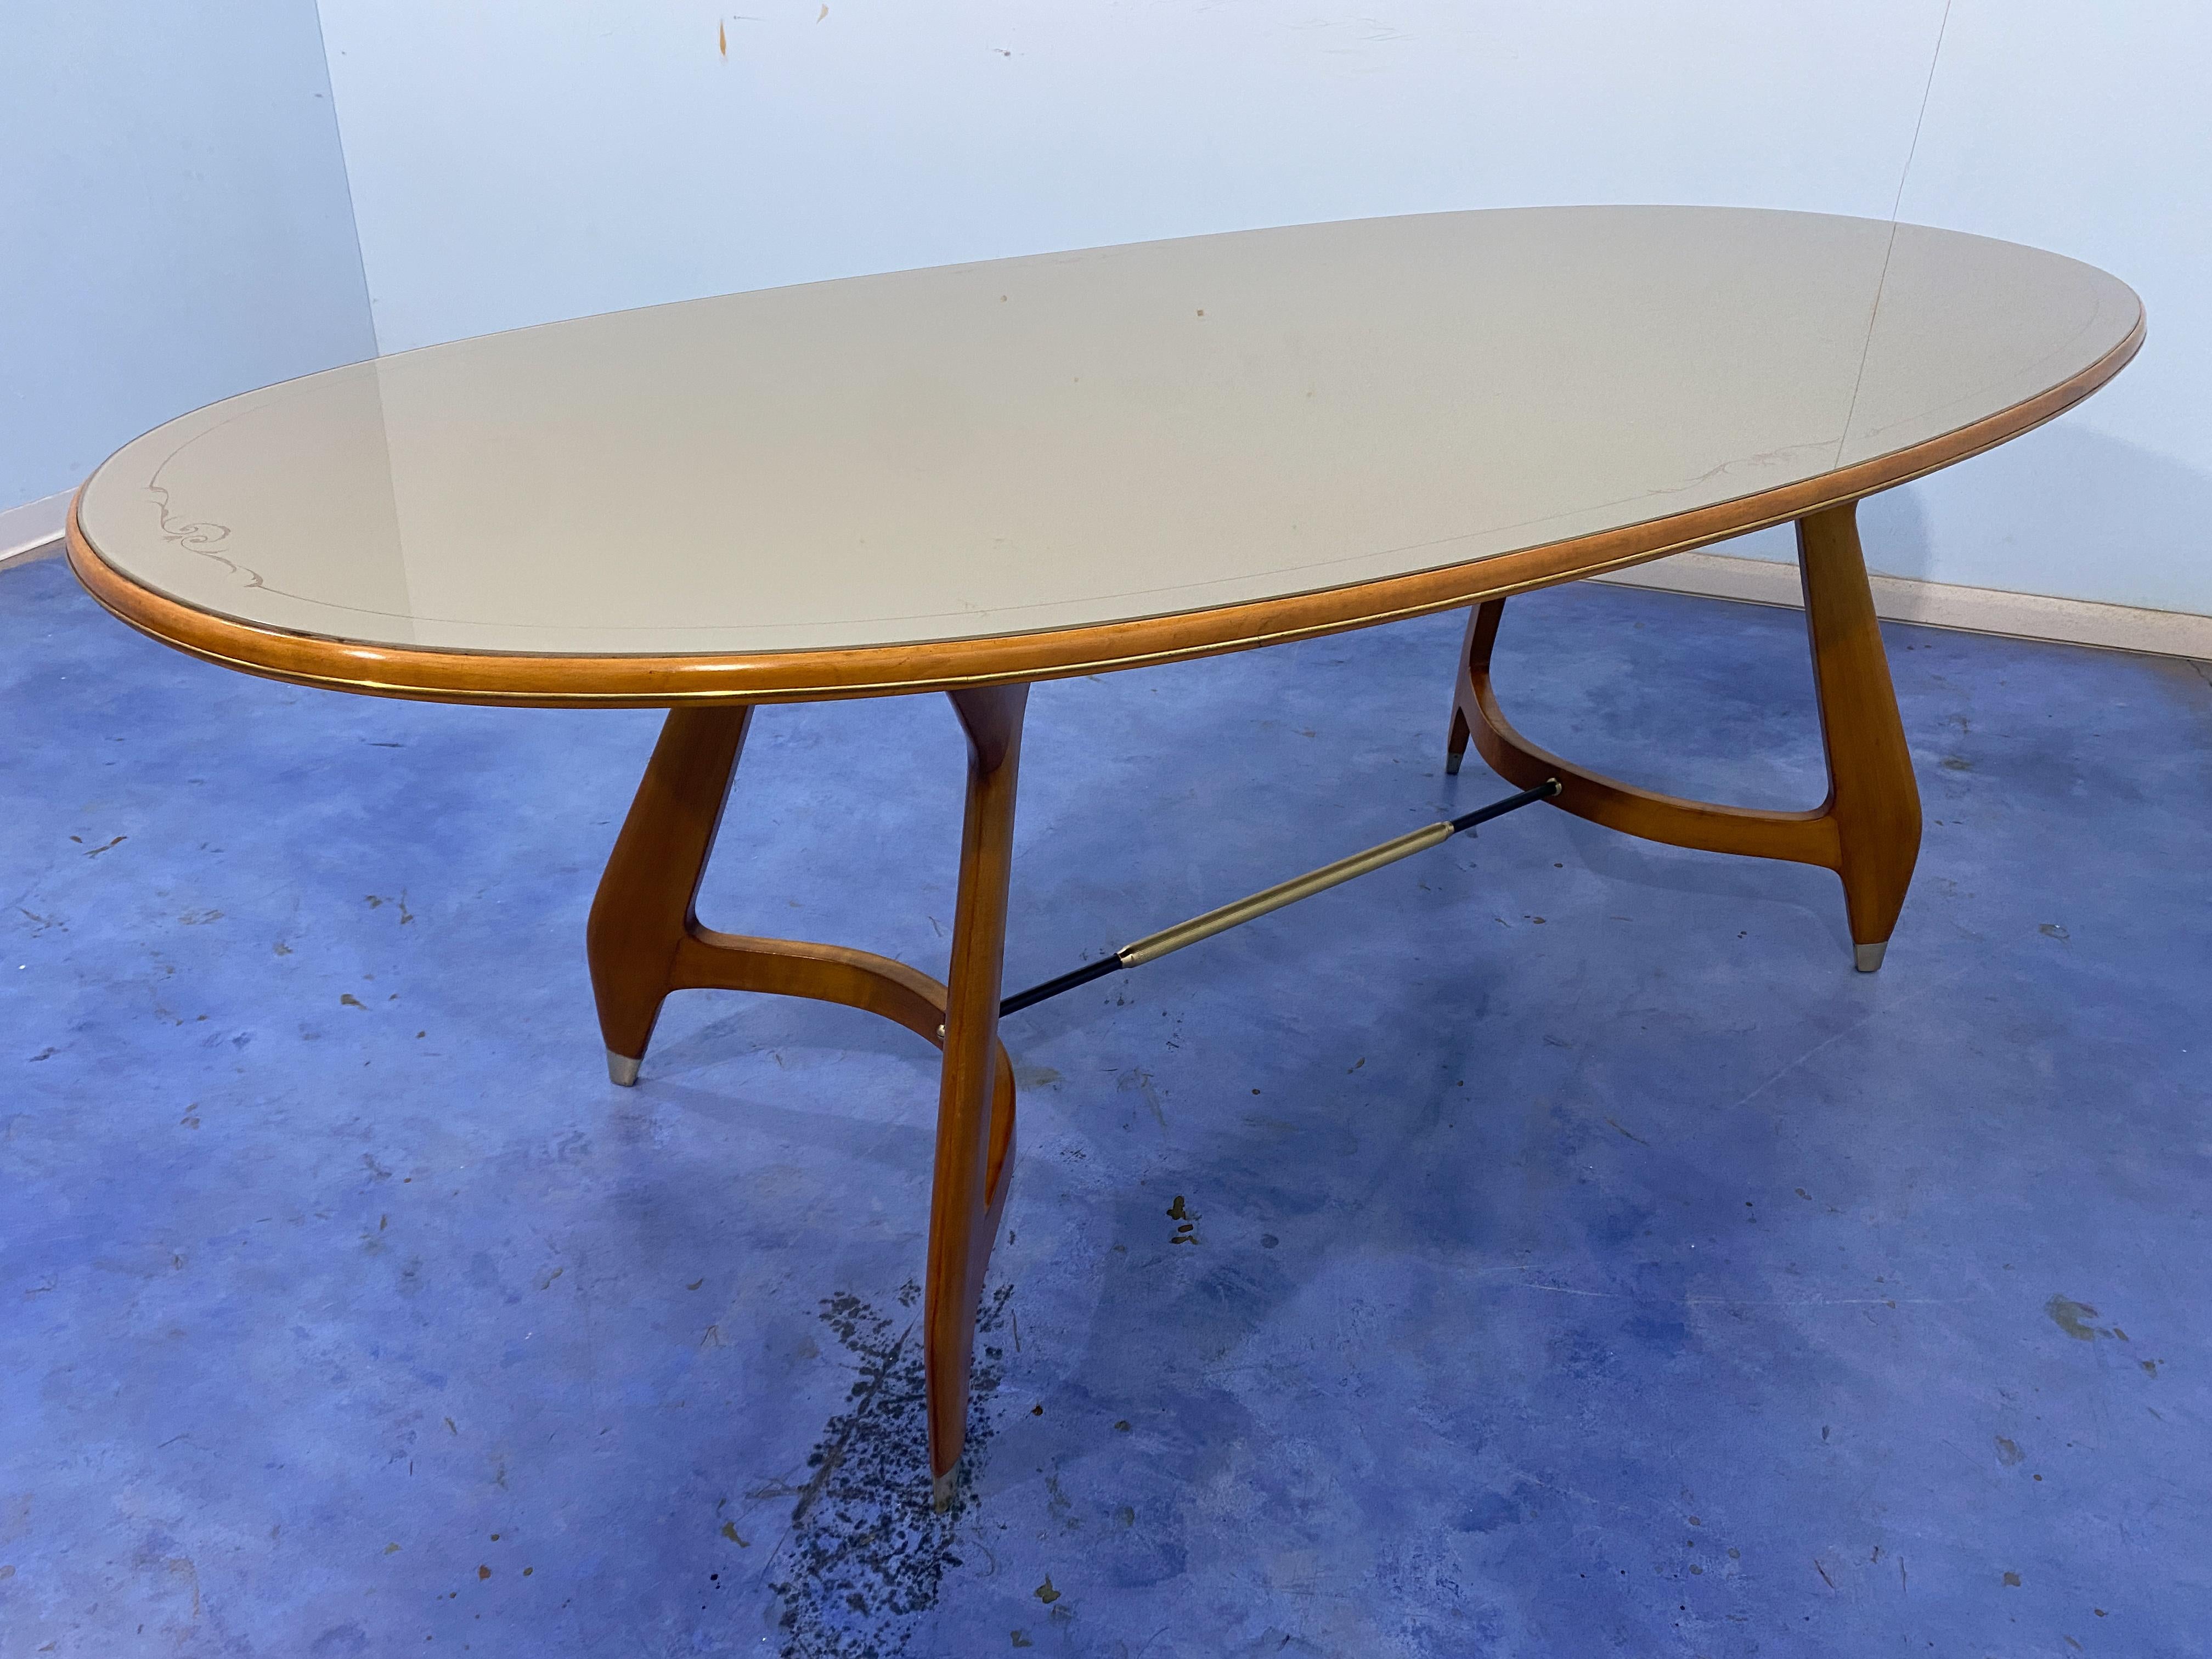 Italian Midcentury Green Olive Dining Table by Vittorio Dassi, 1950s For Sale 7